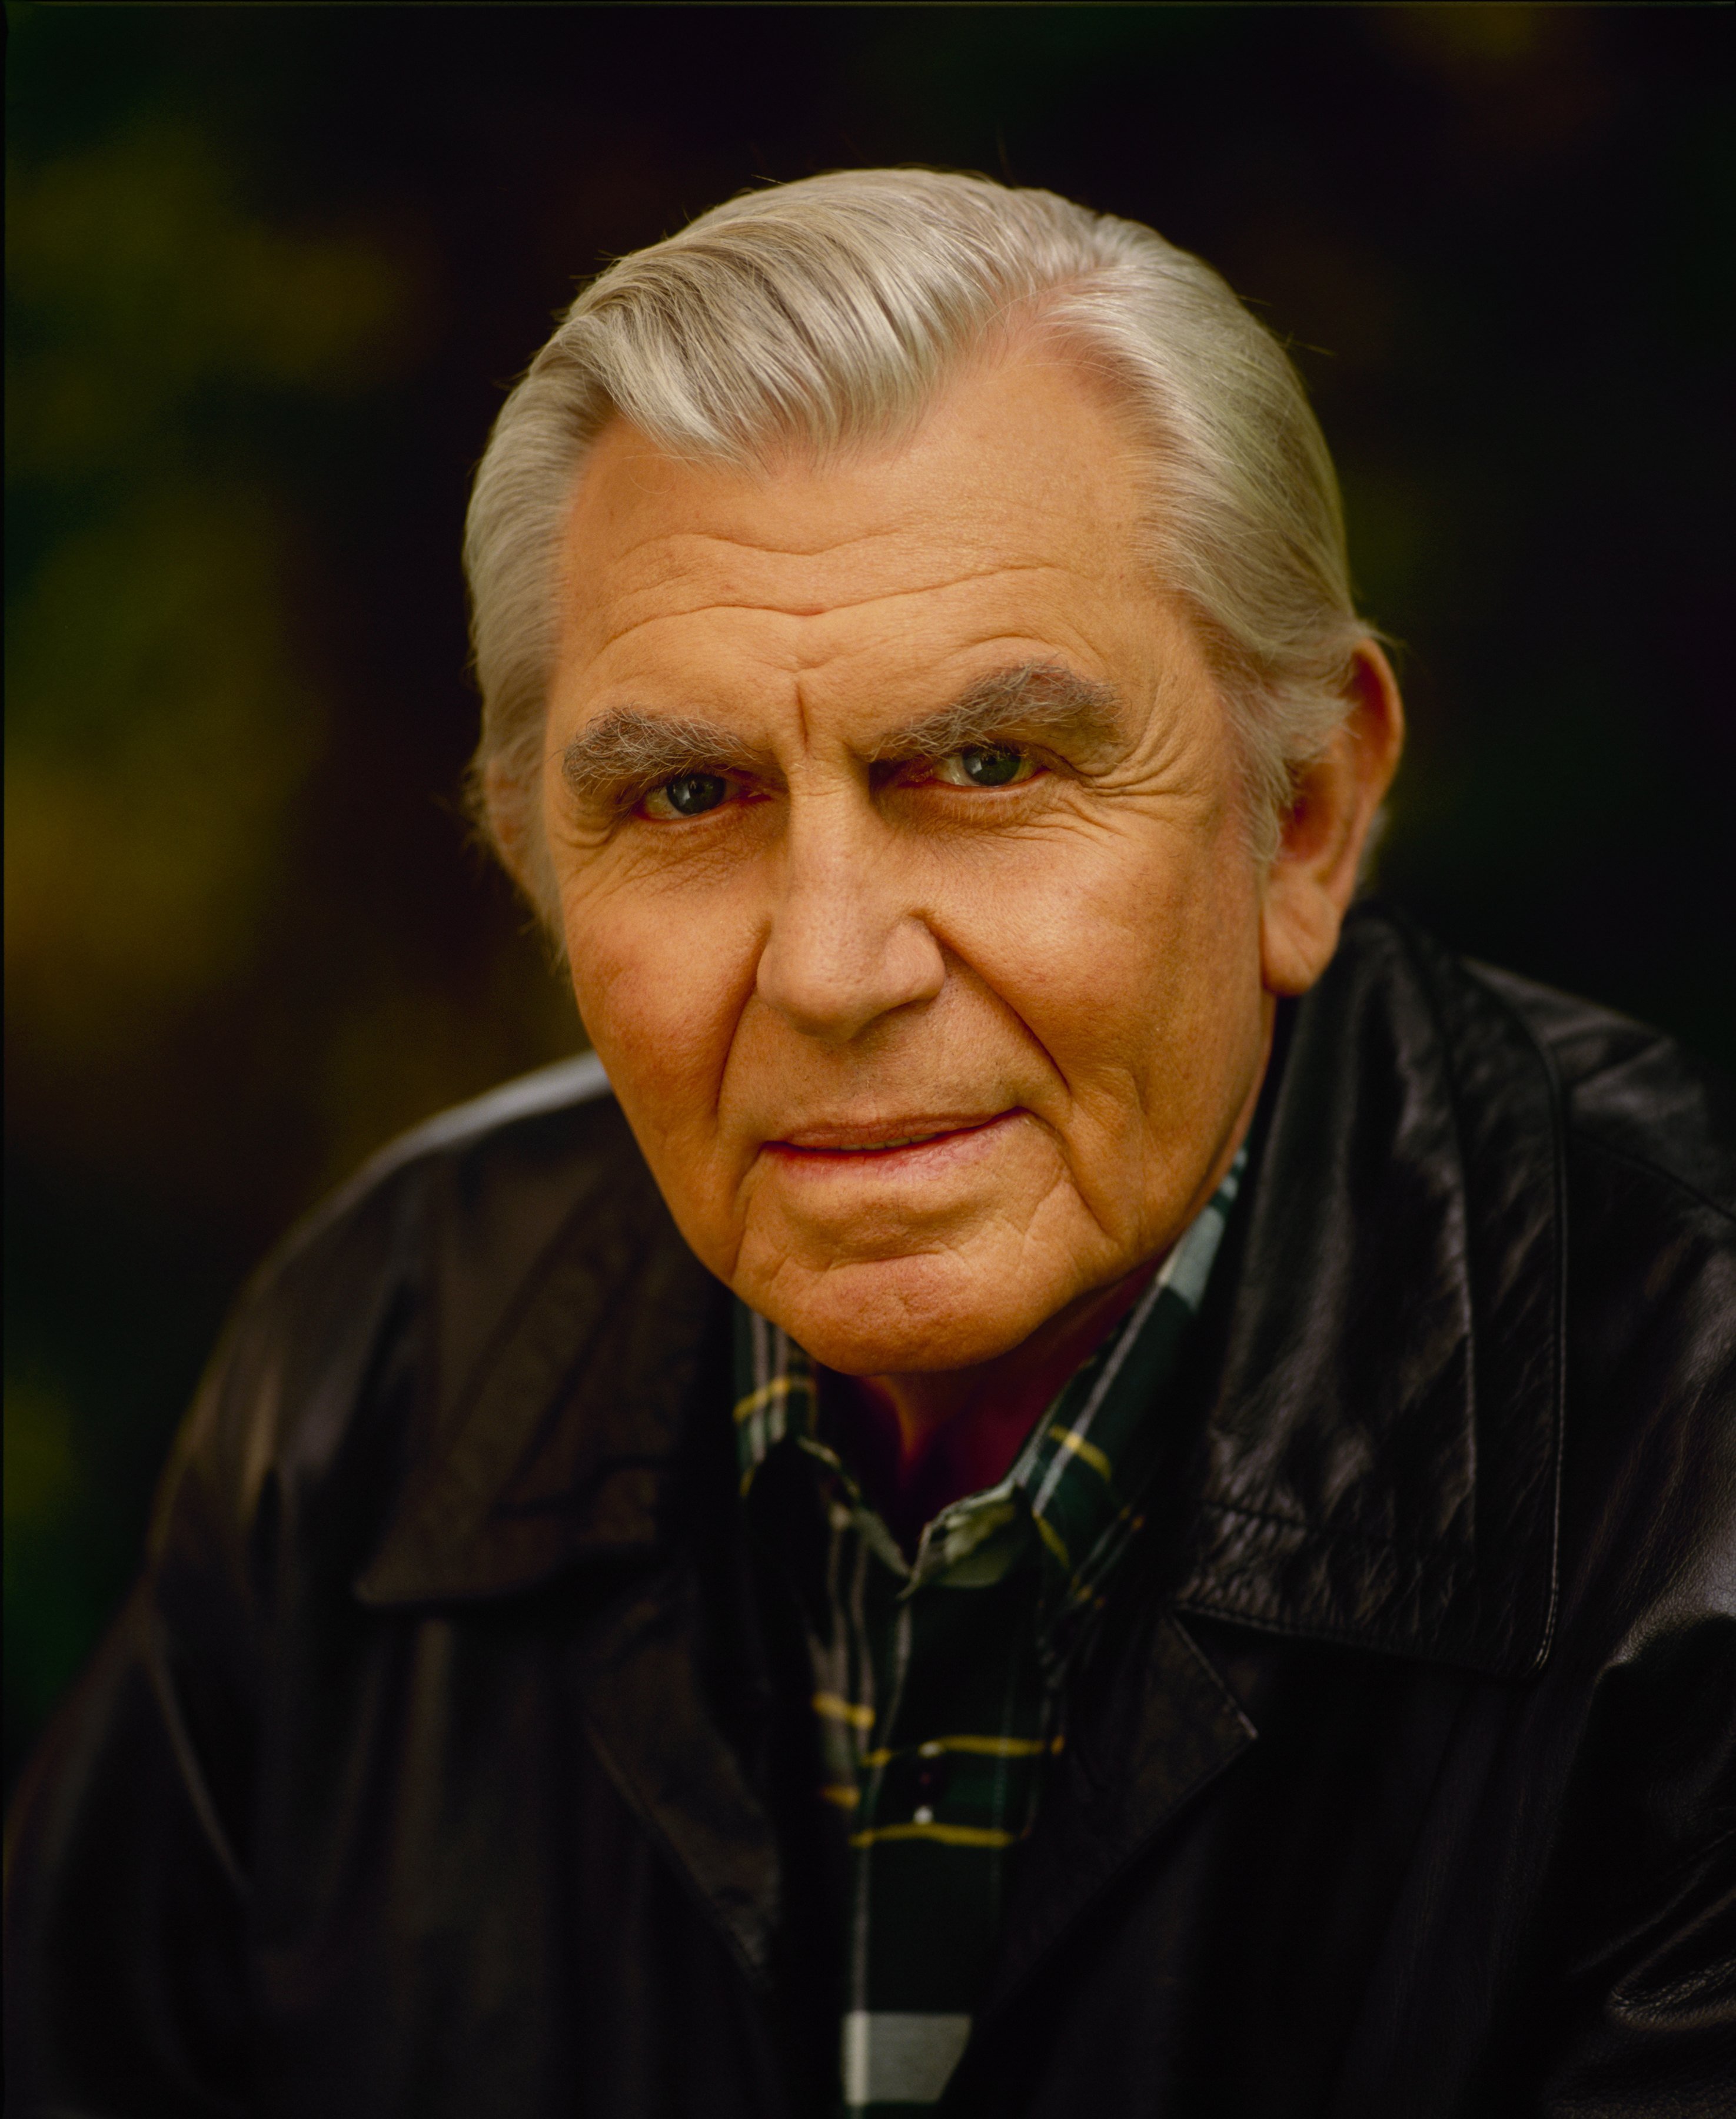 Photo of Andy Griffith on March 30, 1992 | Source: Getty Images